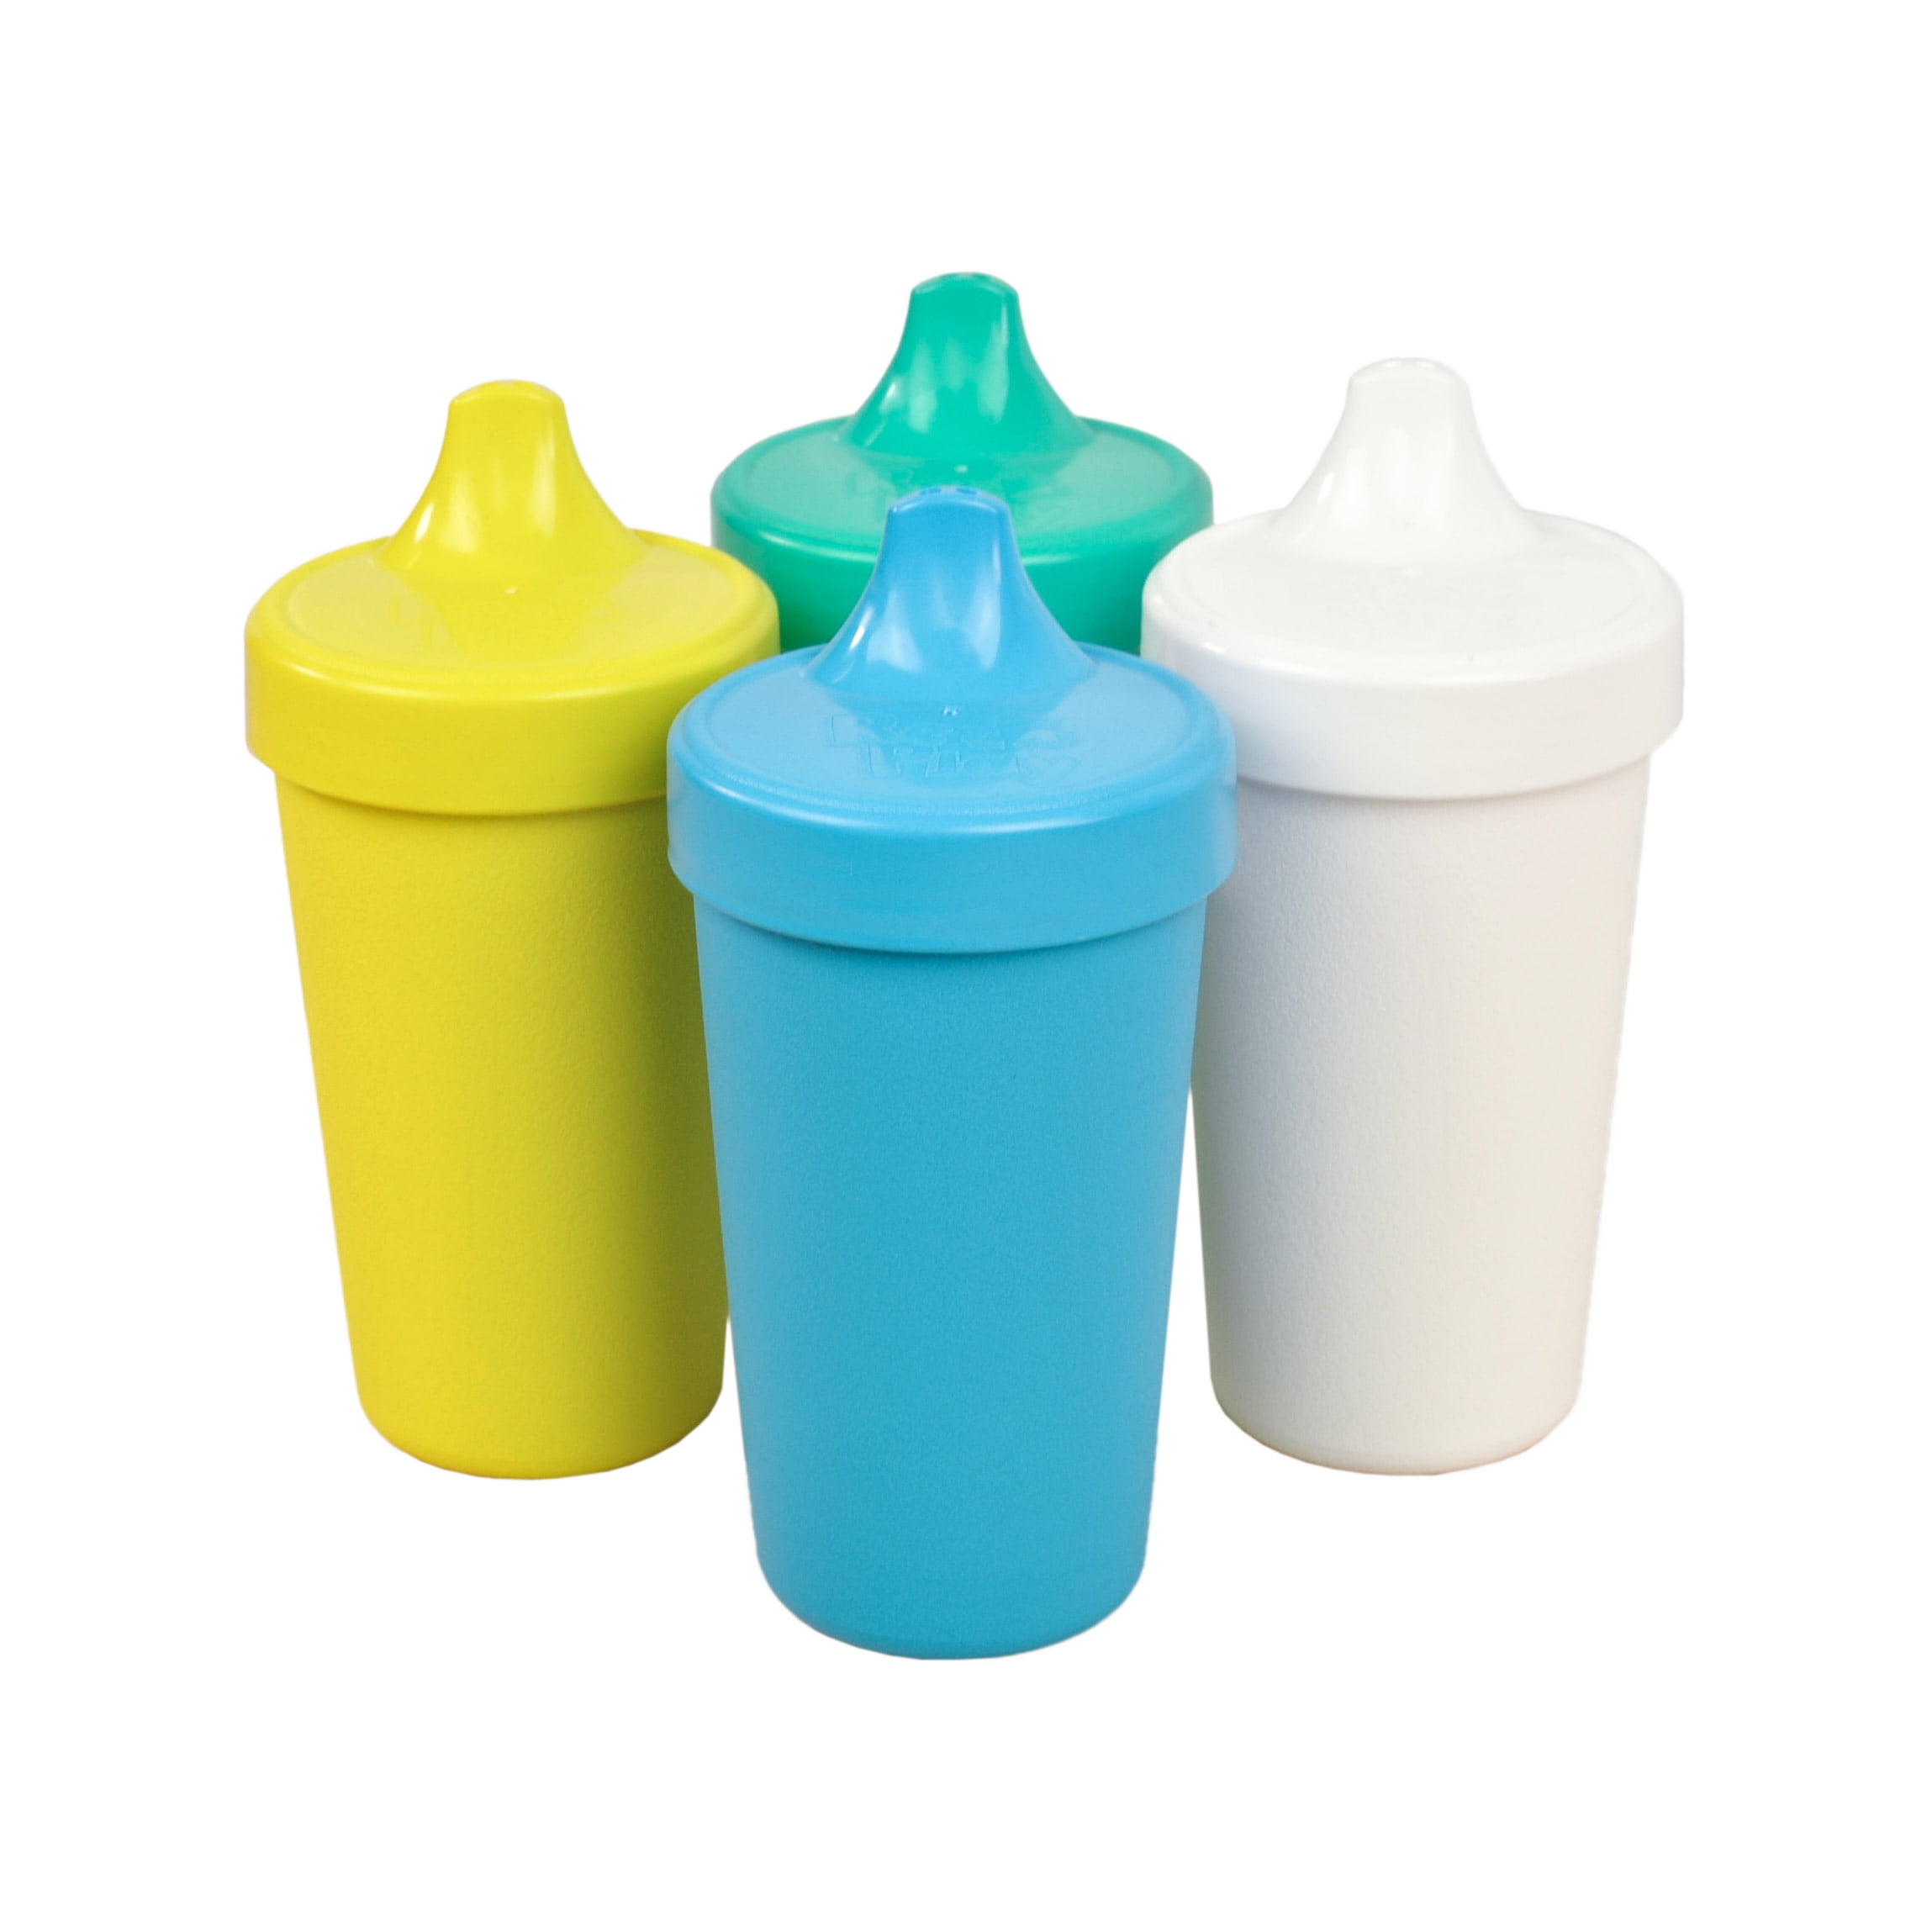 and Child Feeding Bright Pink Re-Play Made in The USA 4pk No Spill Sippy Cups for Baby Sky Blue Yellow Lime Green Toddler Easter+ 